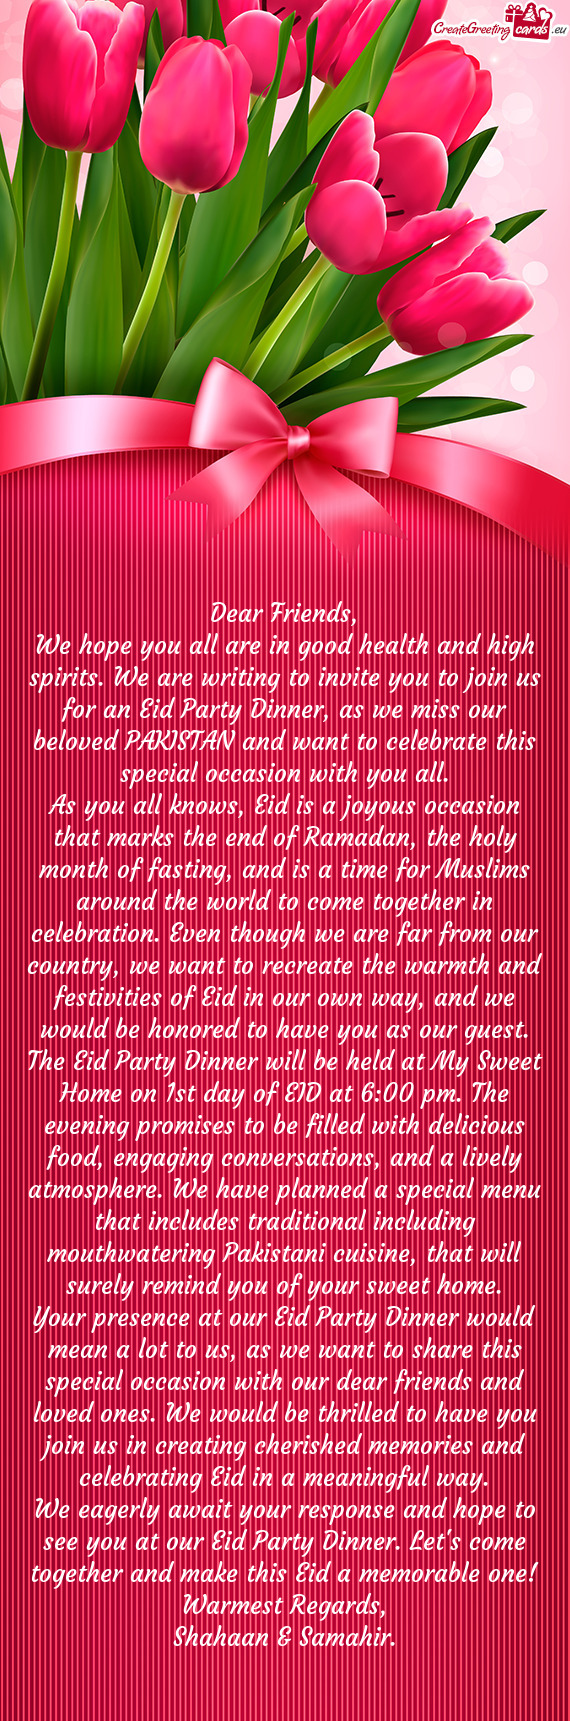 We hope you all are in good health and high spirits. We are writing to invite you to join us for an